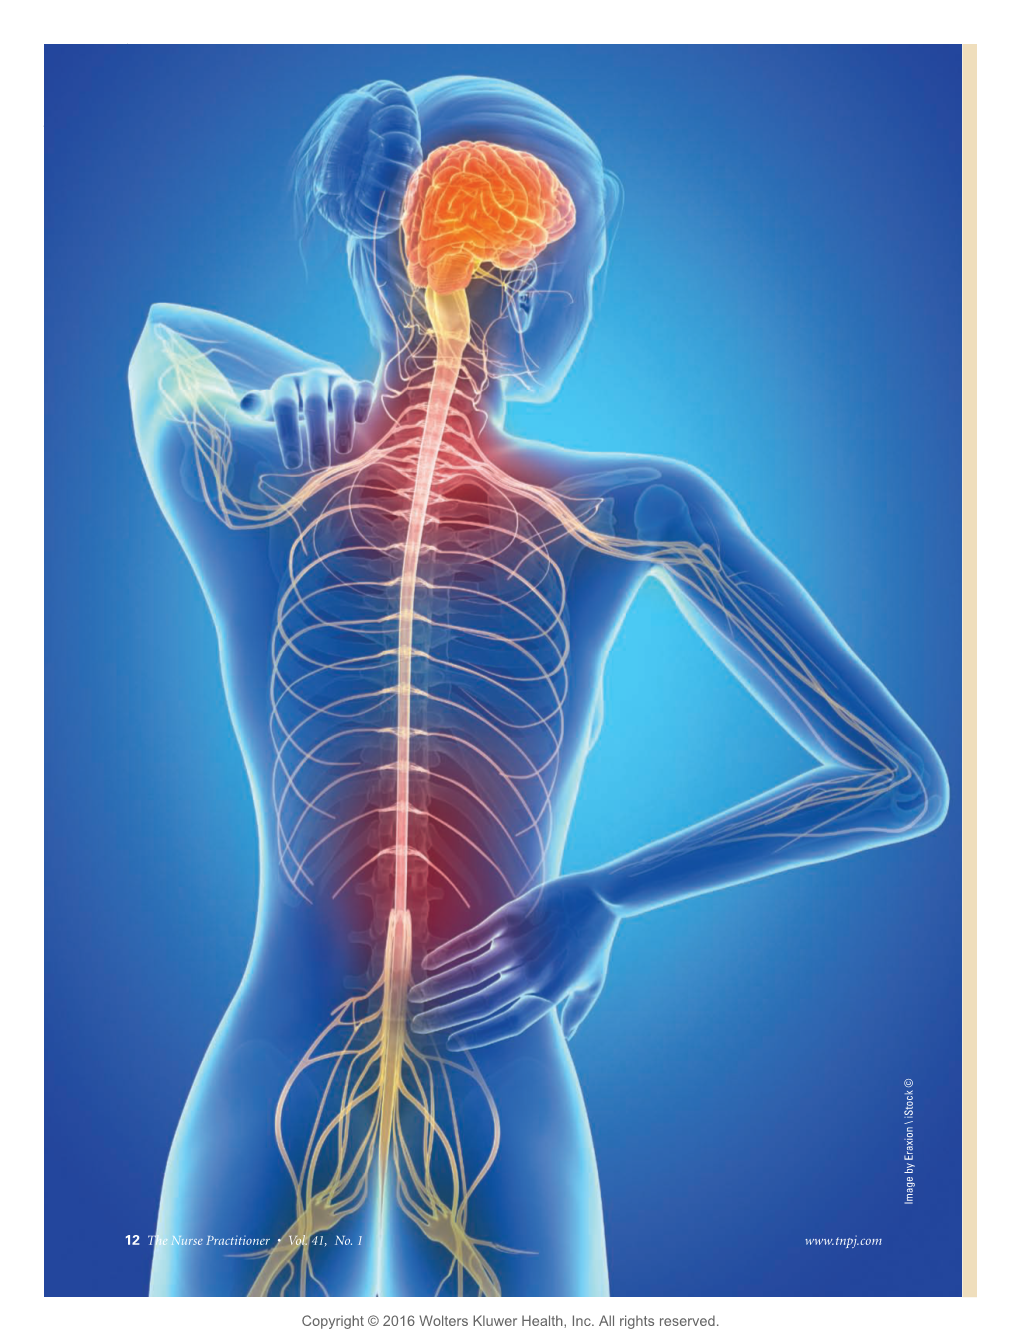 Treating Co-Occurring Chronic Low Back Pain & Generalized Anxiety